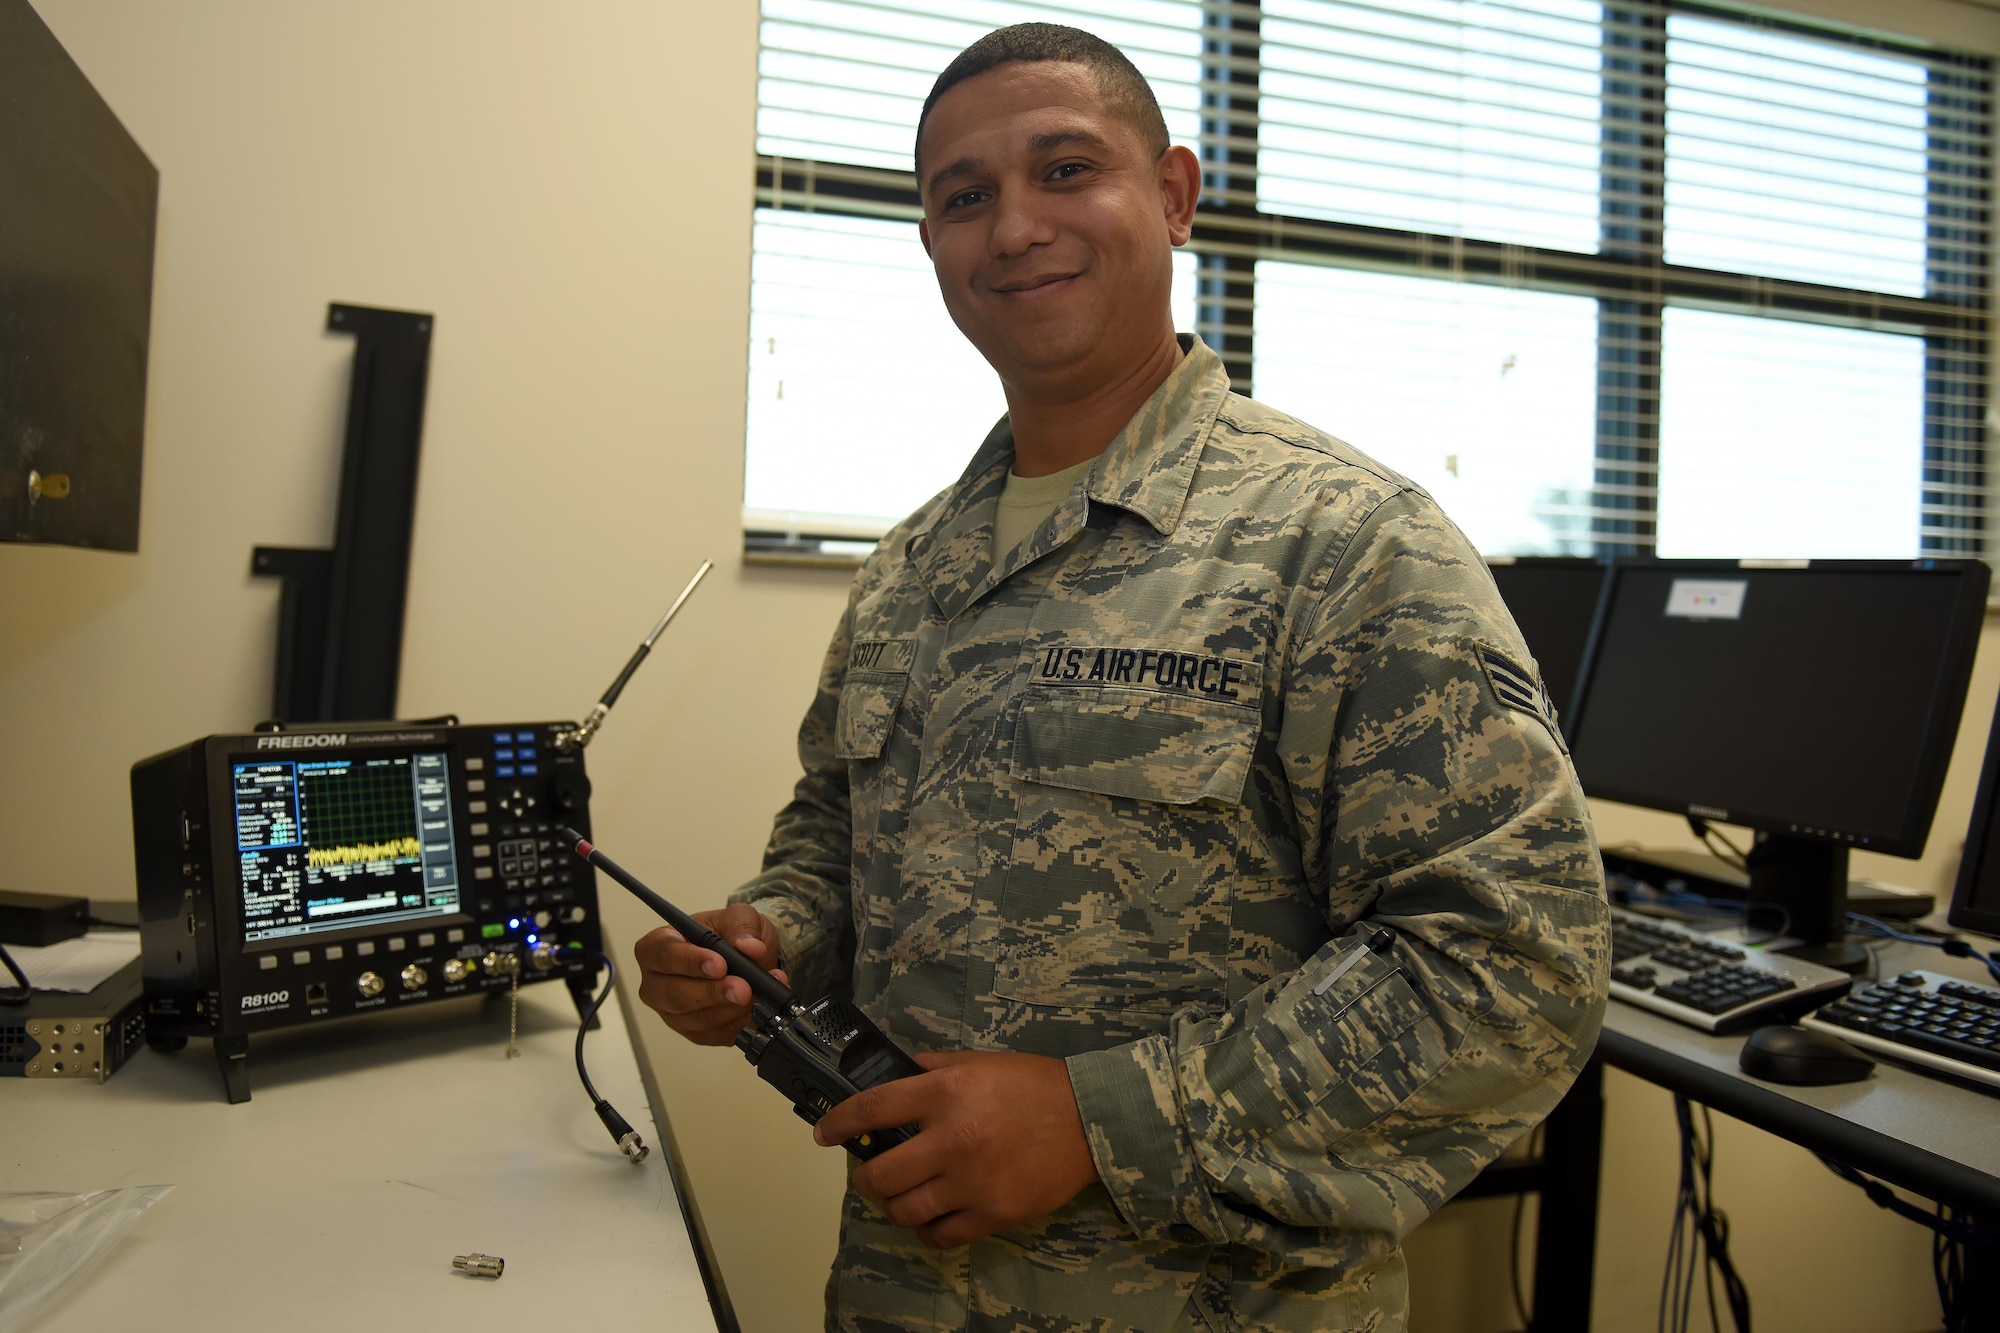 U.S. Air Force Senior Airman Romel Scott, a radio frequency technician assigned to the 169th Communications Squadron of the South Carolina Air National Guard at McEntire Joint National Guard Base, S.C., June 4, 2017. (U.S. Air National Guard photo by Senior Airman Ashleigh S. Pavelek)